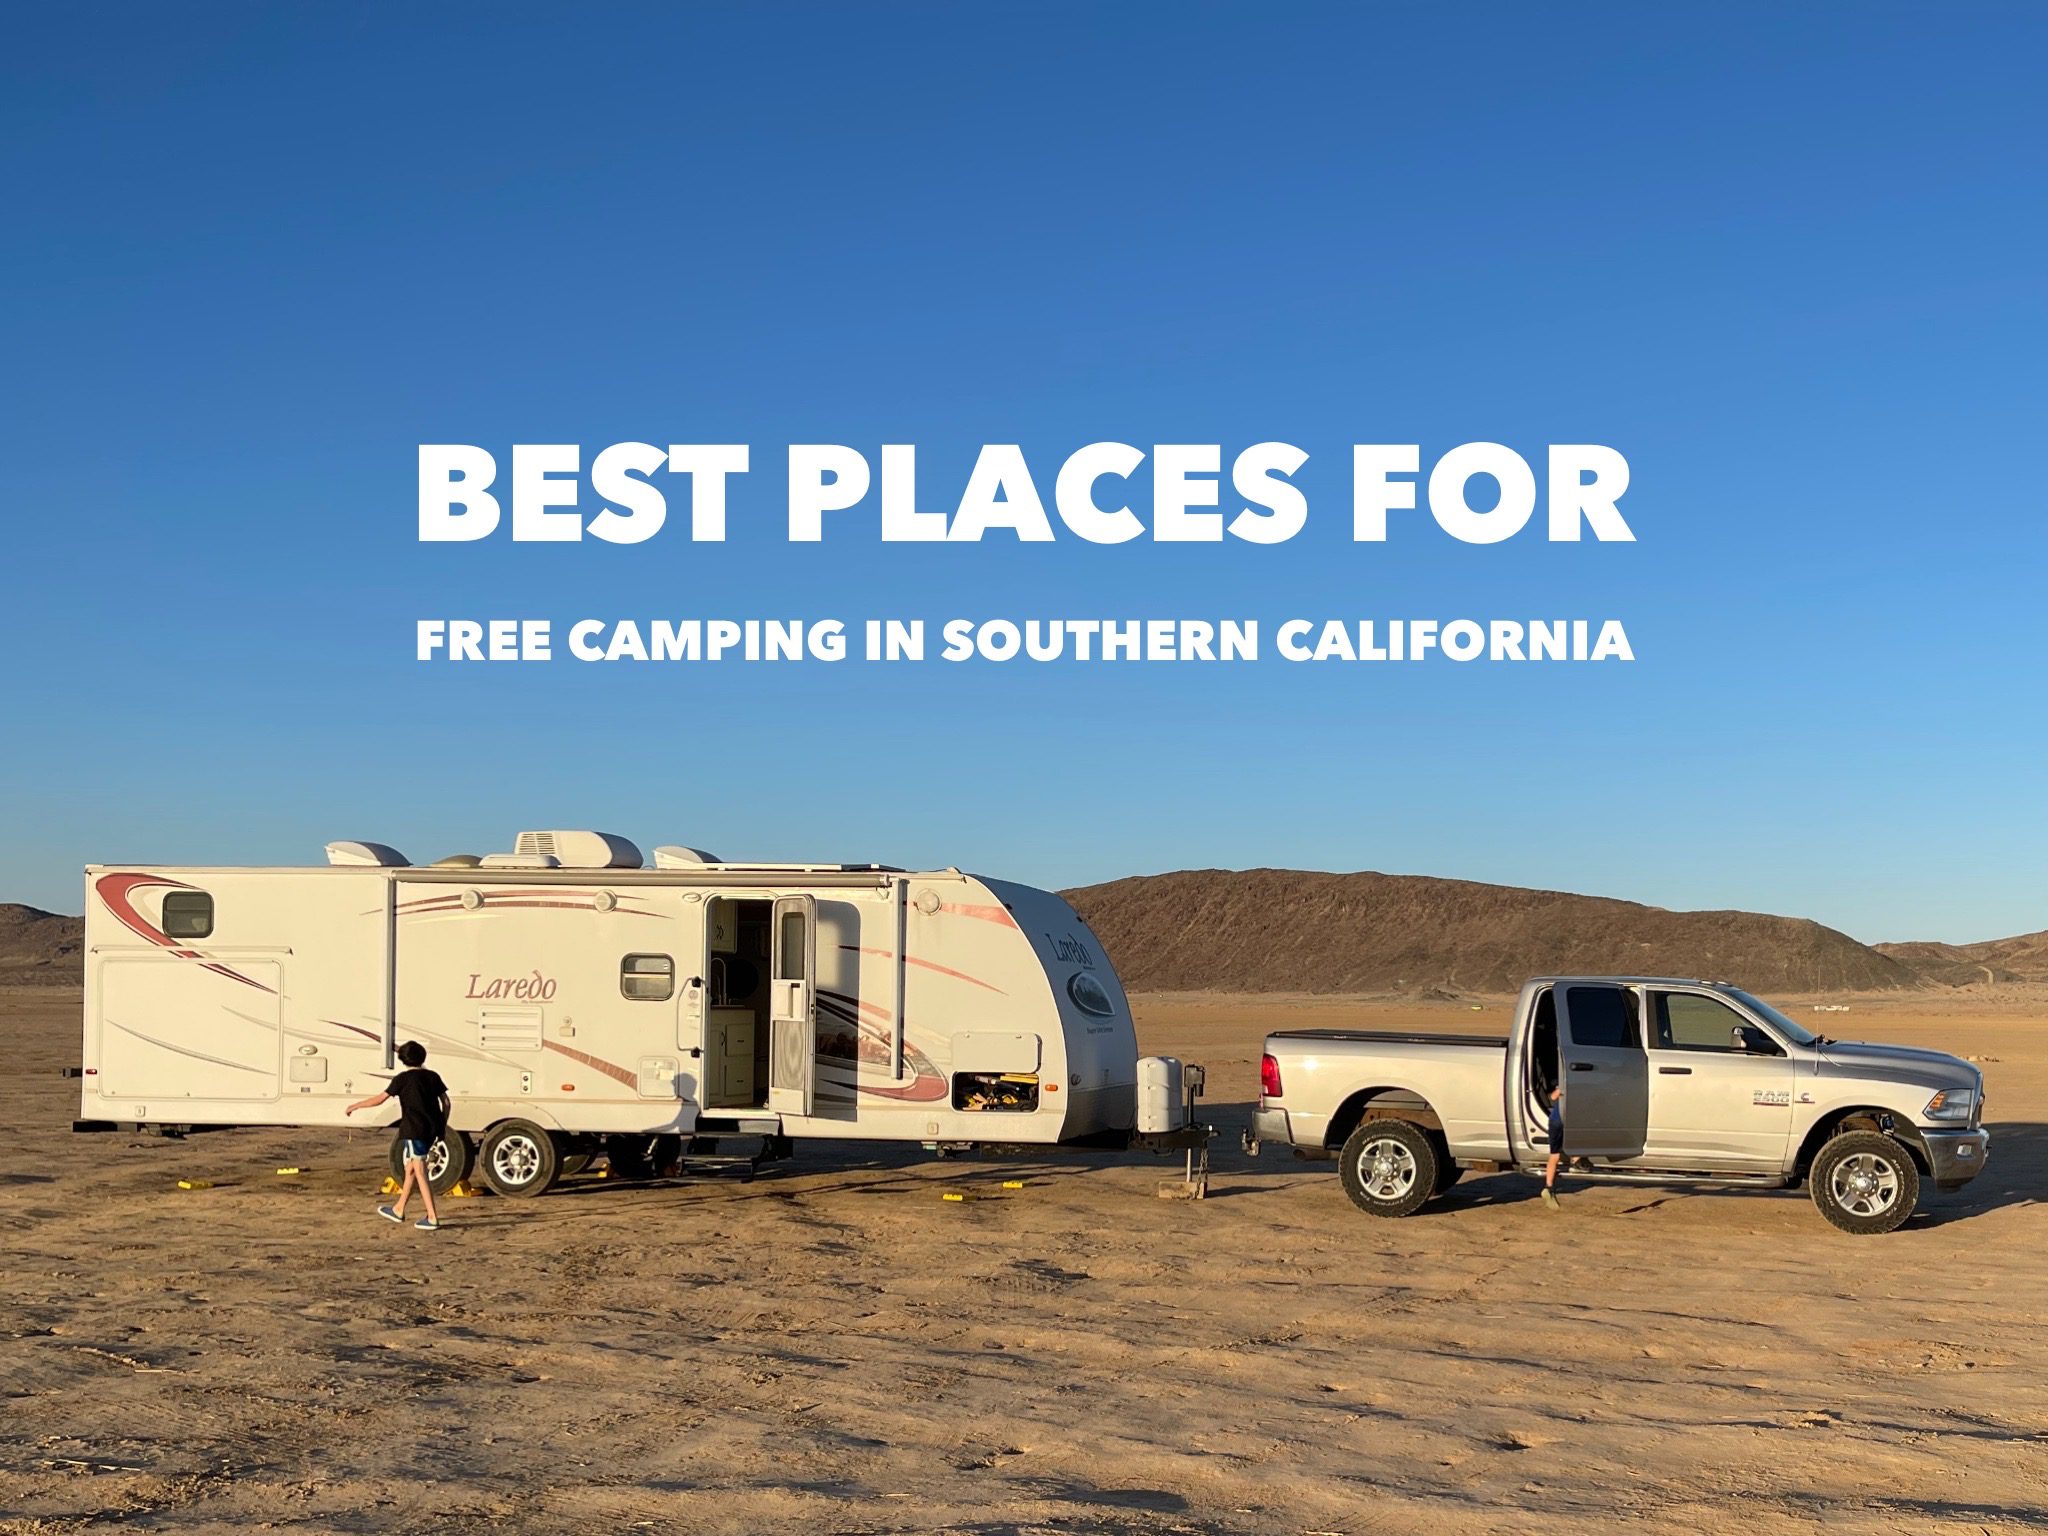 Best Places for Free Dispersed Camping; Southern California Edition